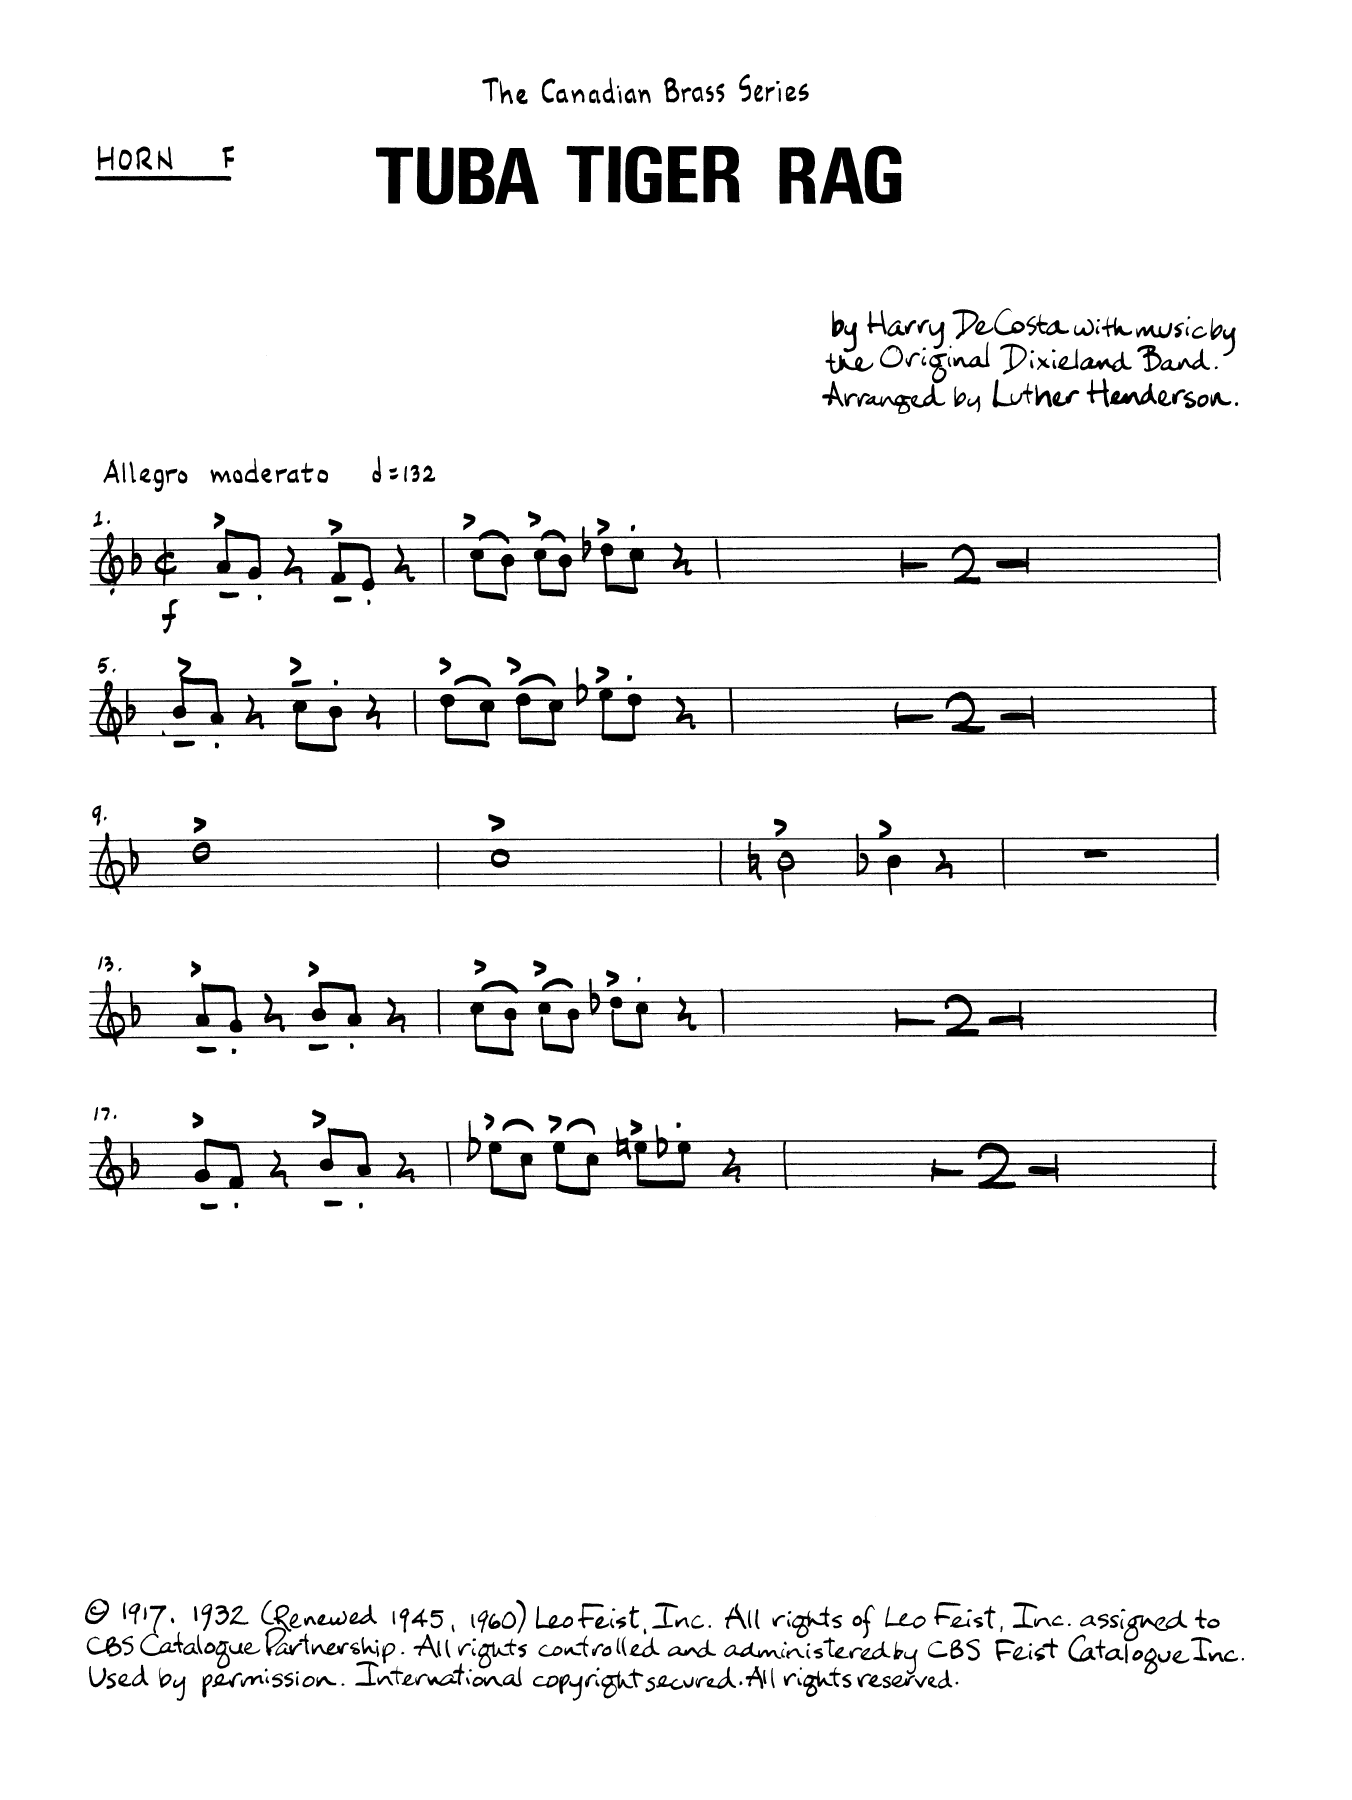 Download Luther Henderson Tuba Tiger Rag - Horn in F Sheet Music